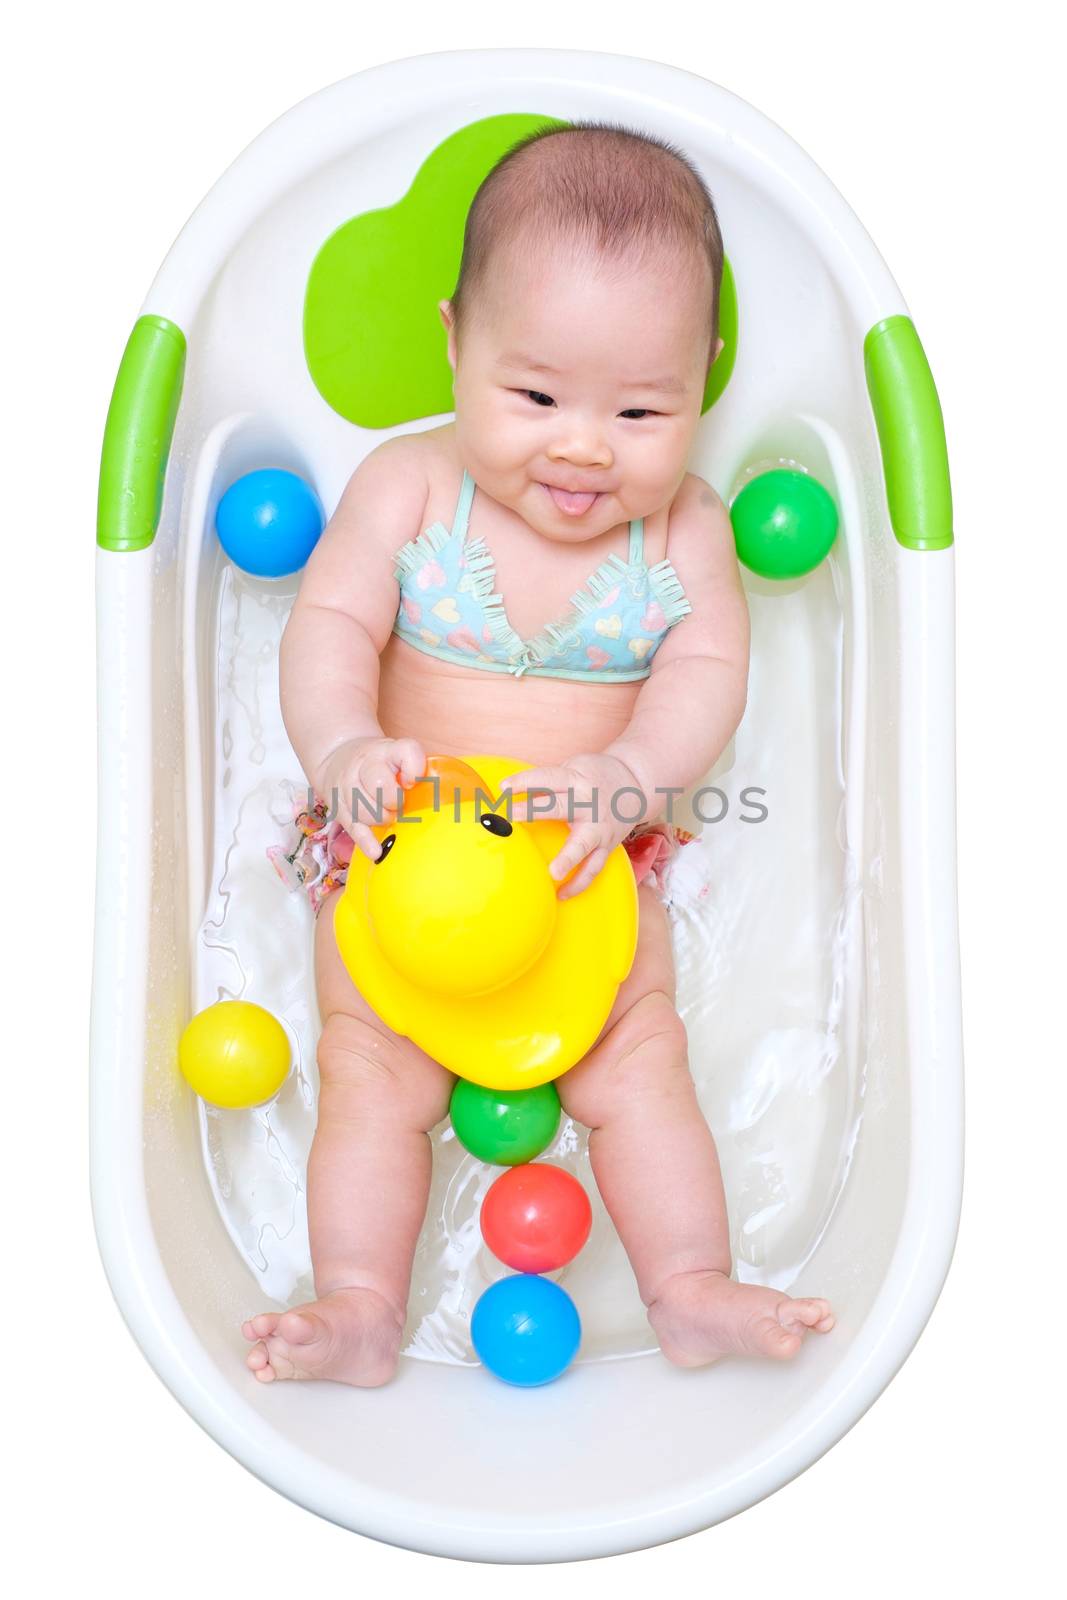 Asian baby girl taking a bath in white tub and playing duck and have different color of plastic balls.